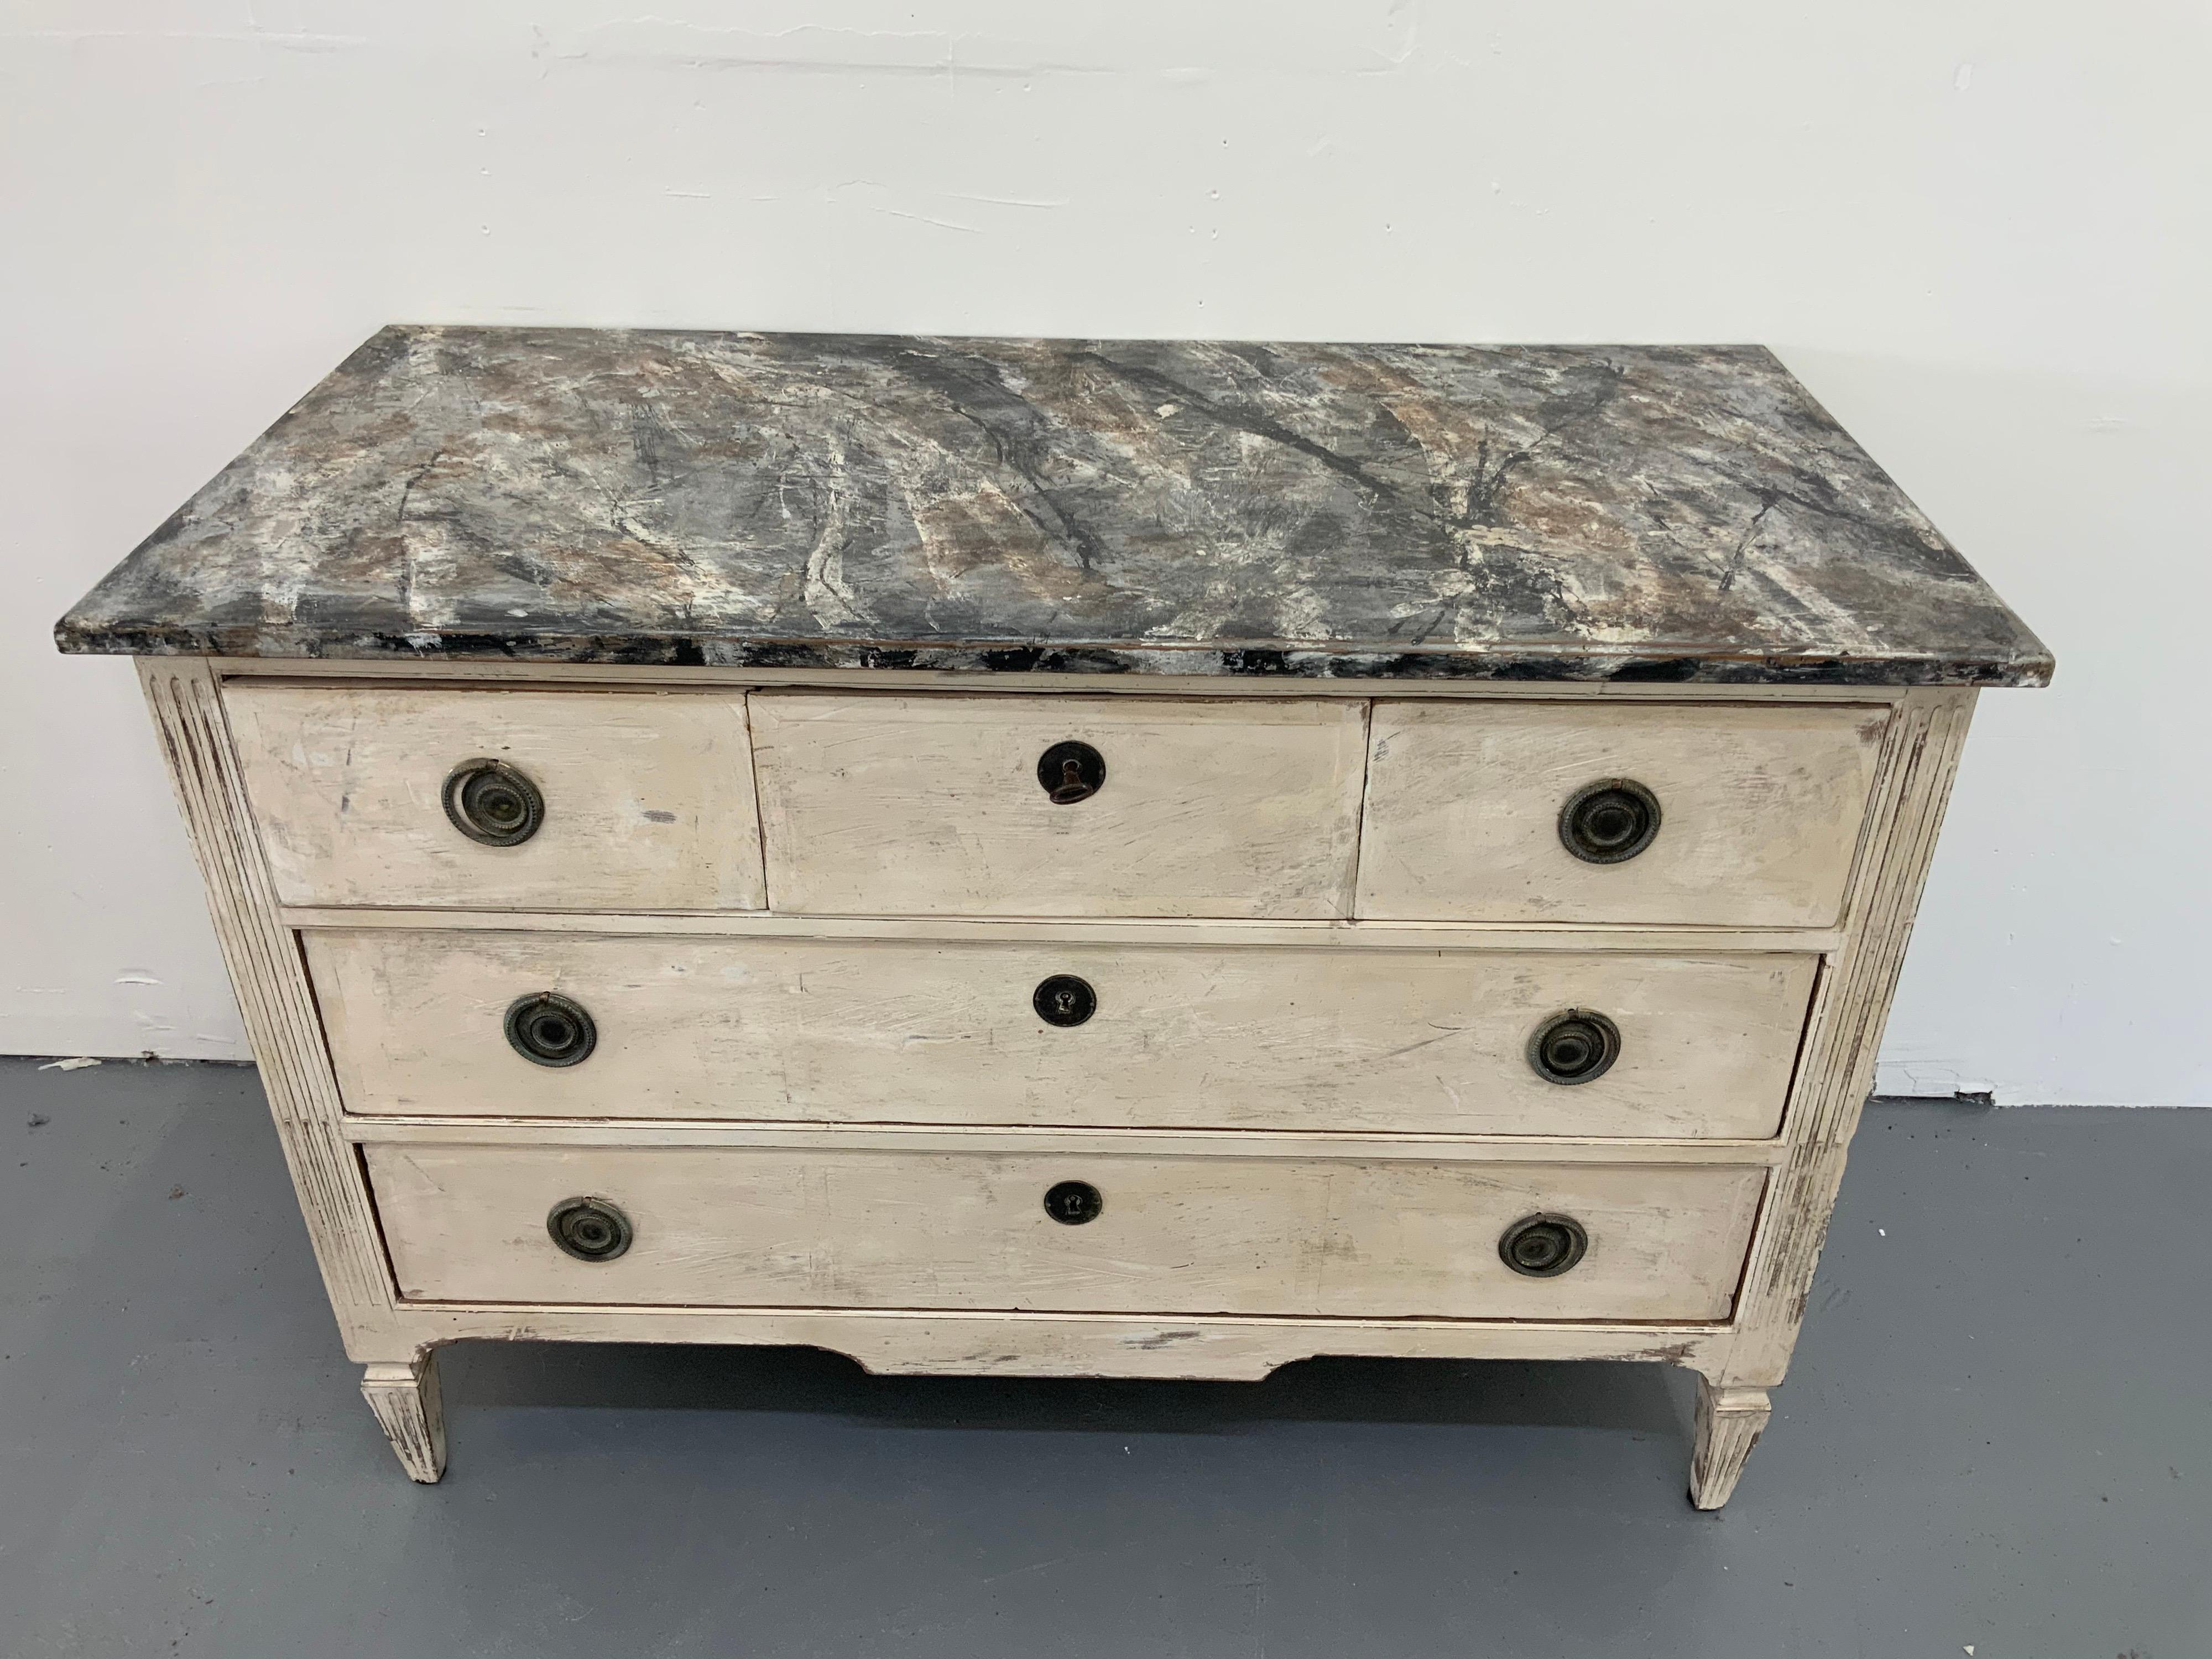 French antiques commode Louis XV style, 1850 with 5 drawers, made in walnut and patinated by Benoit, an interior designer based in France.